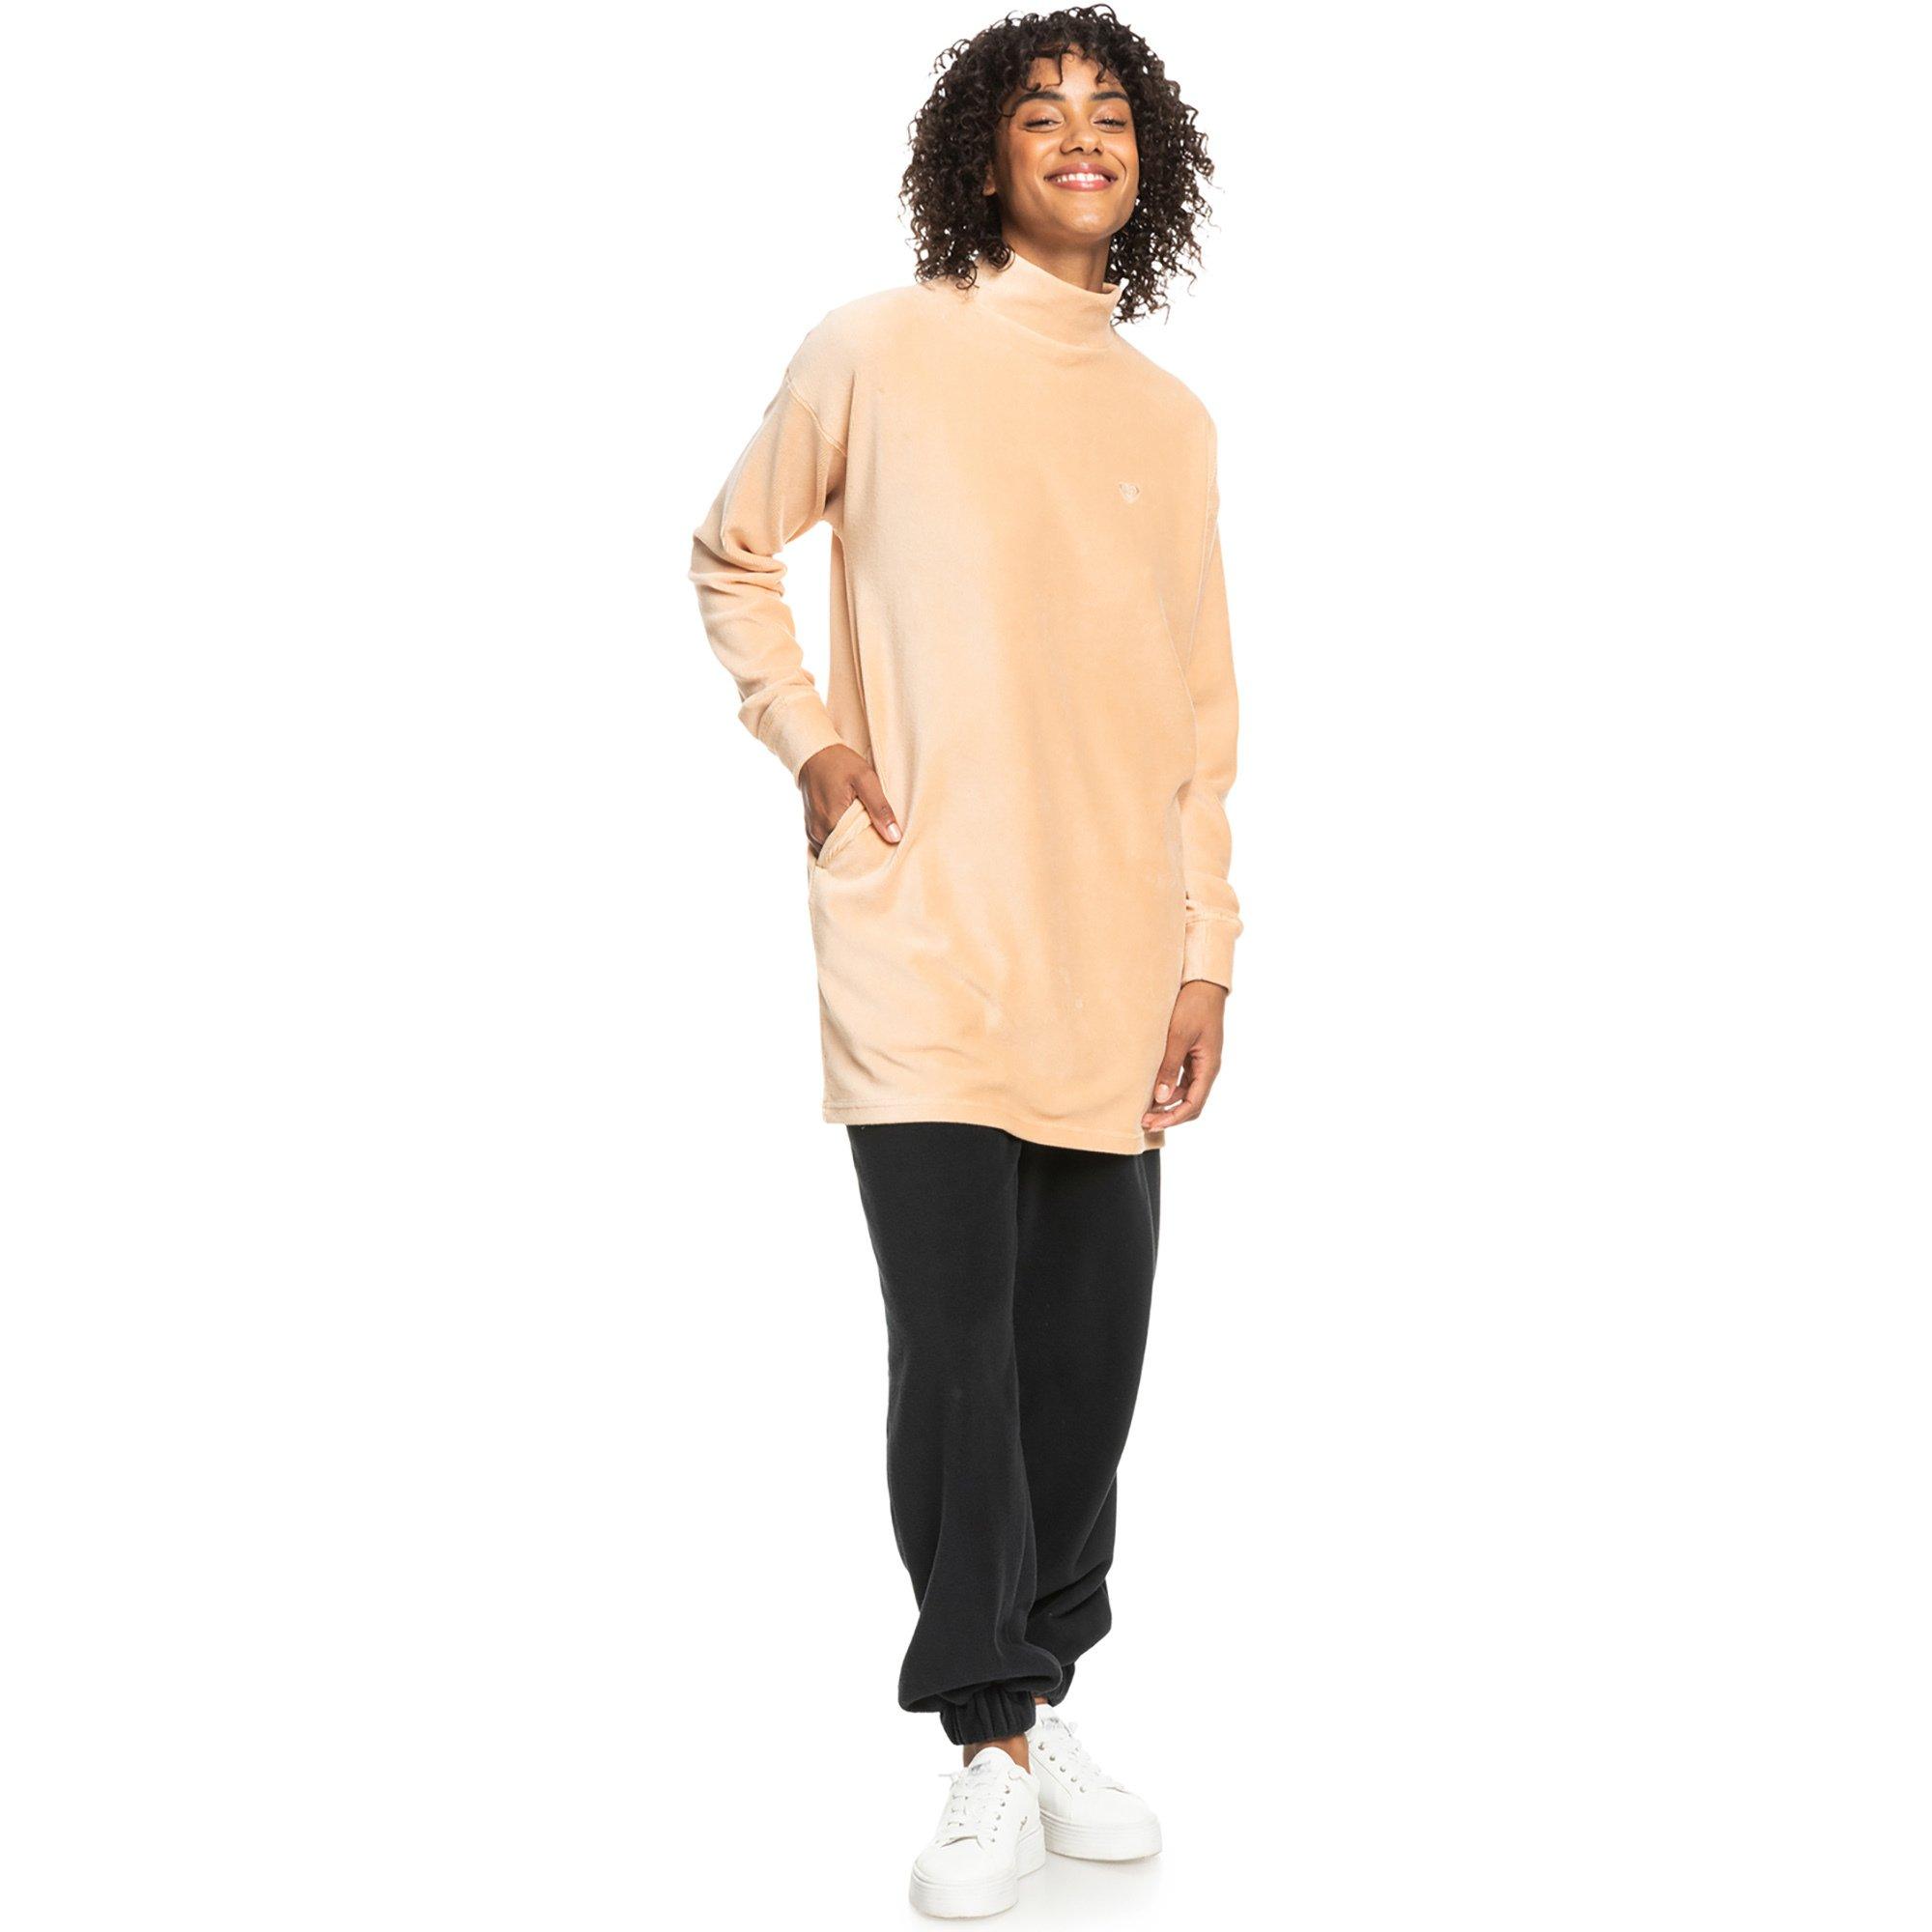 ROXY LISTEN UP Robe en tricot, manches longues 